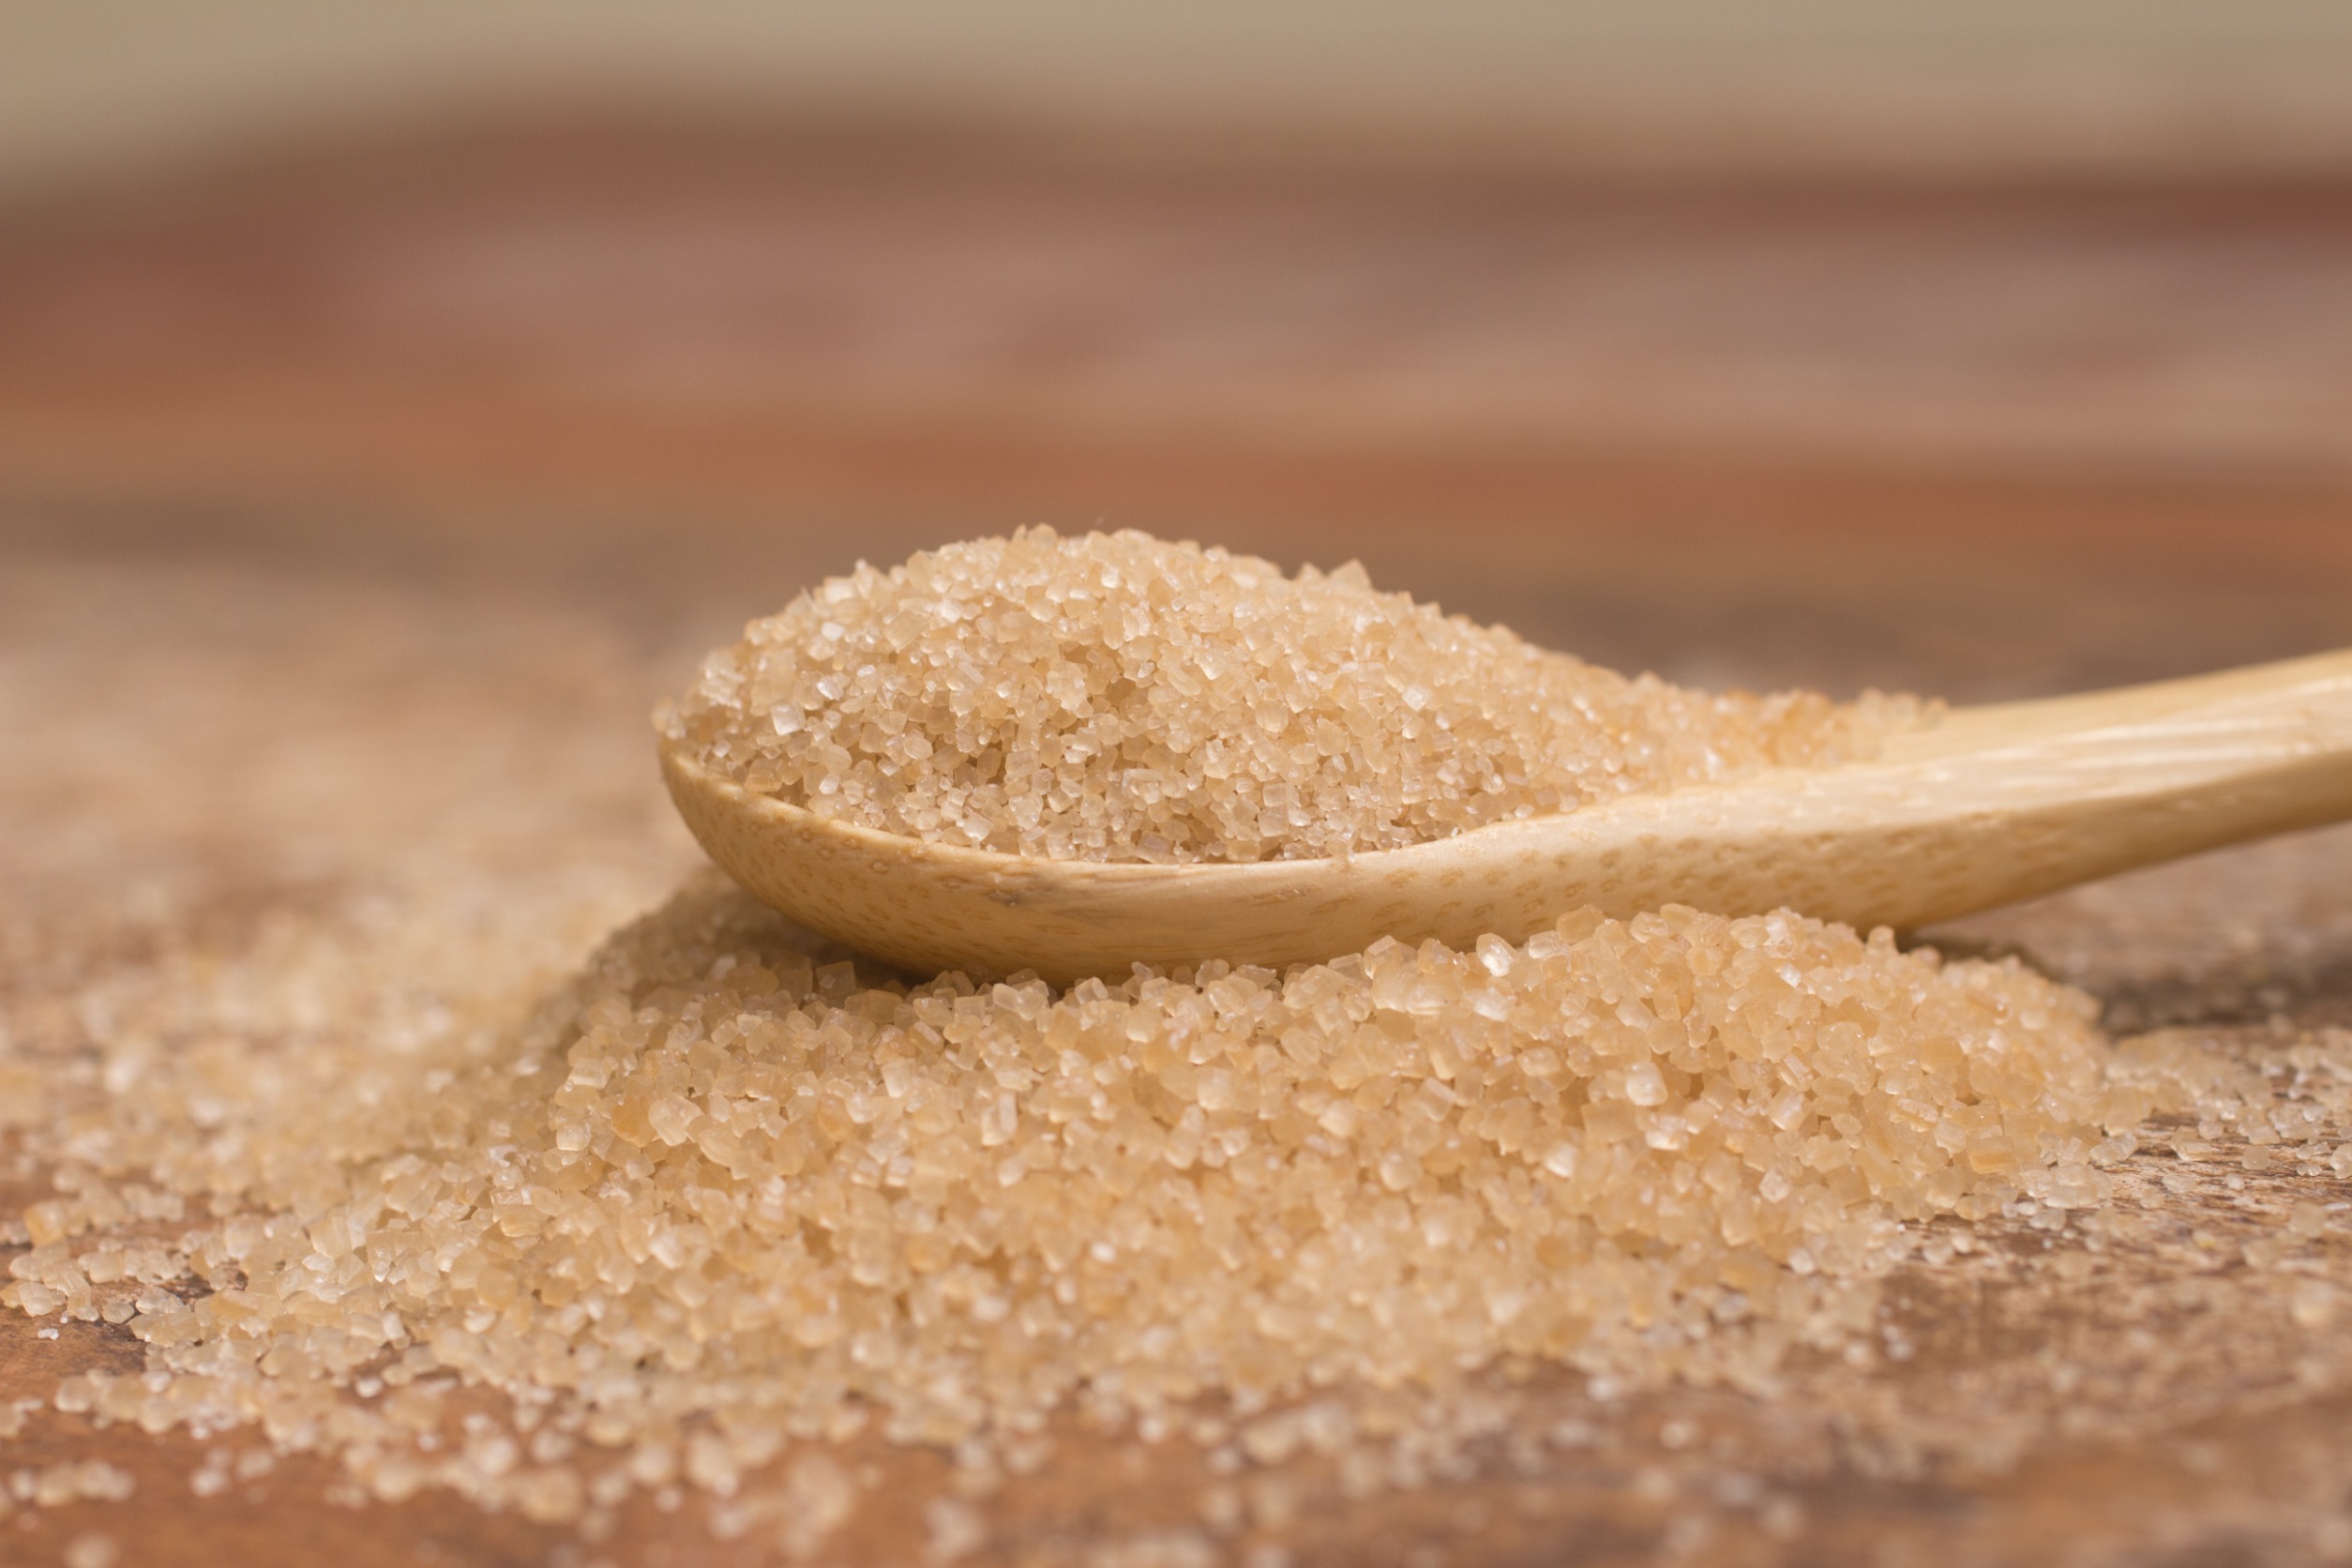 Natural cane sugar from a sauce ingredient supplier in a wooden spoon